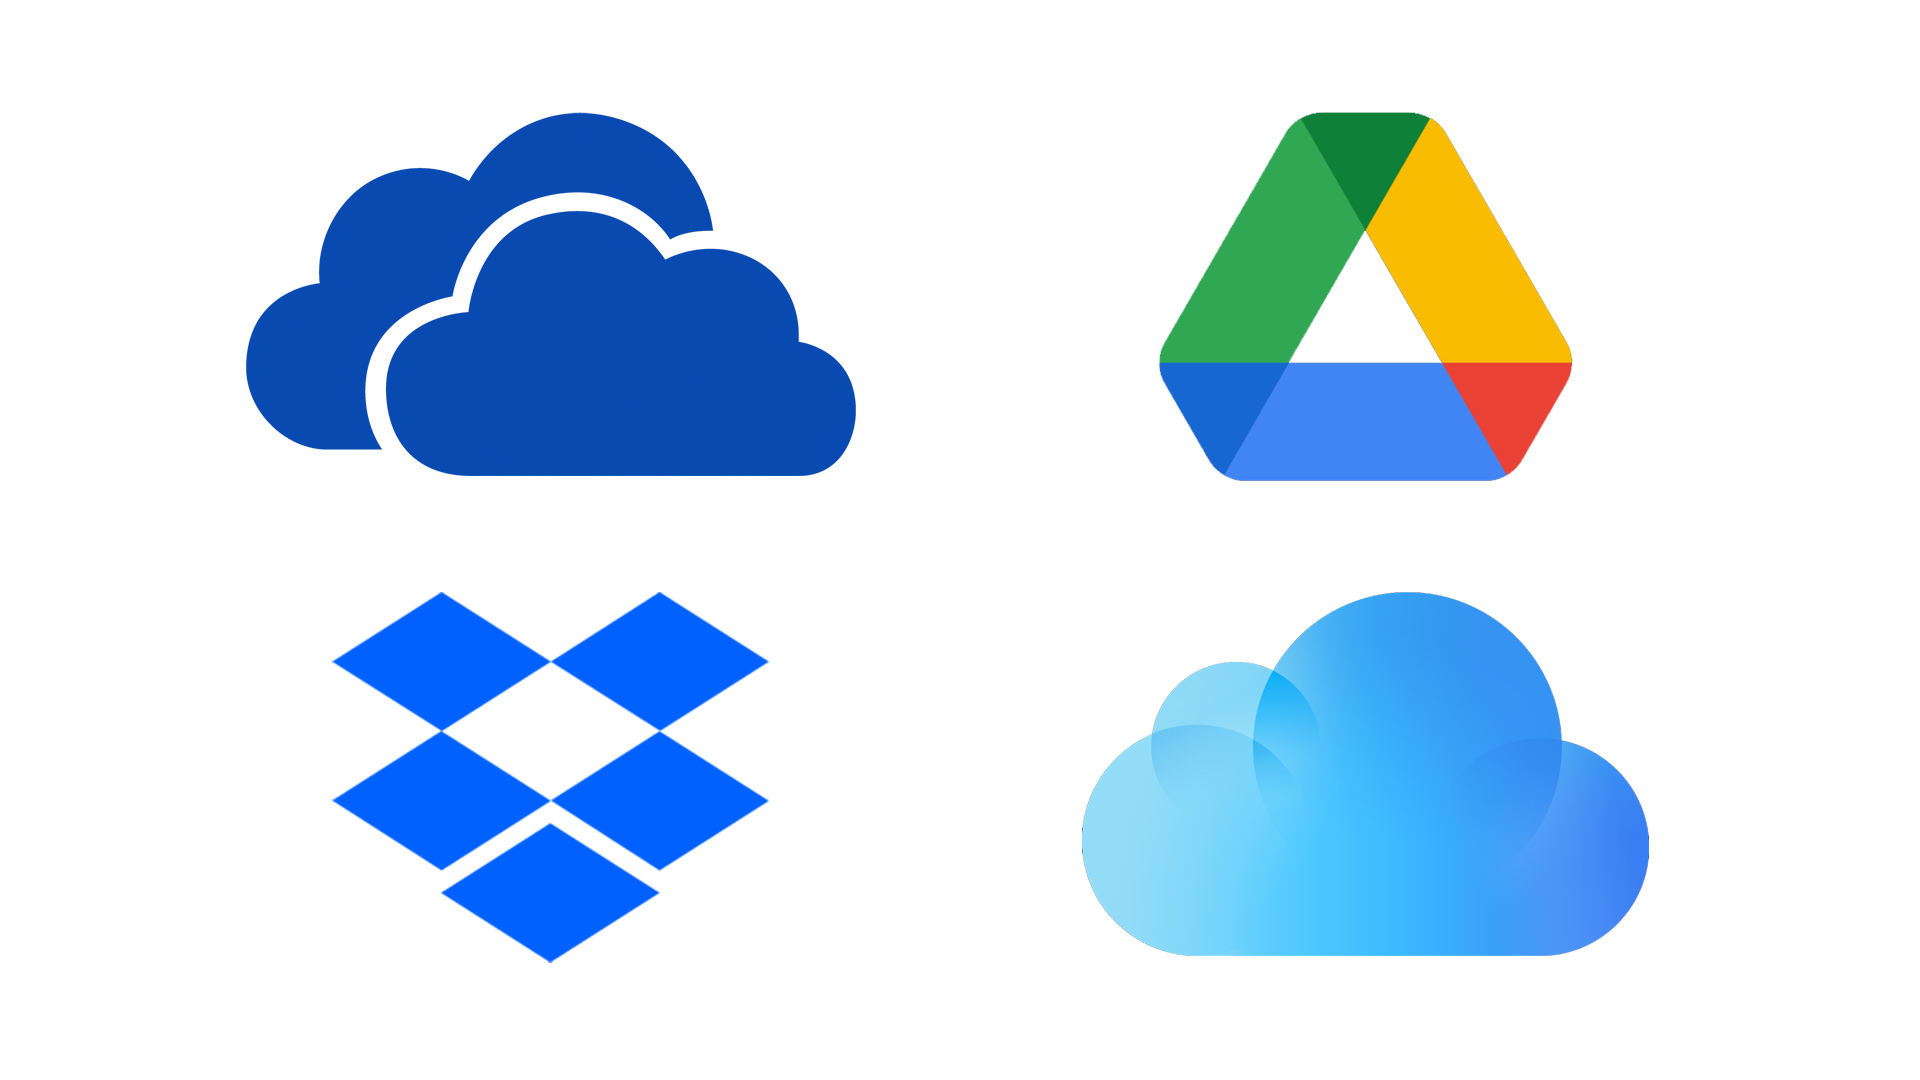 How to use Dropbox, OneDrive, Google Drive, or iCloud | Tom's Guide